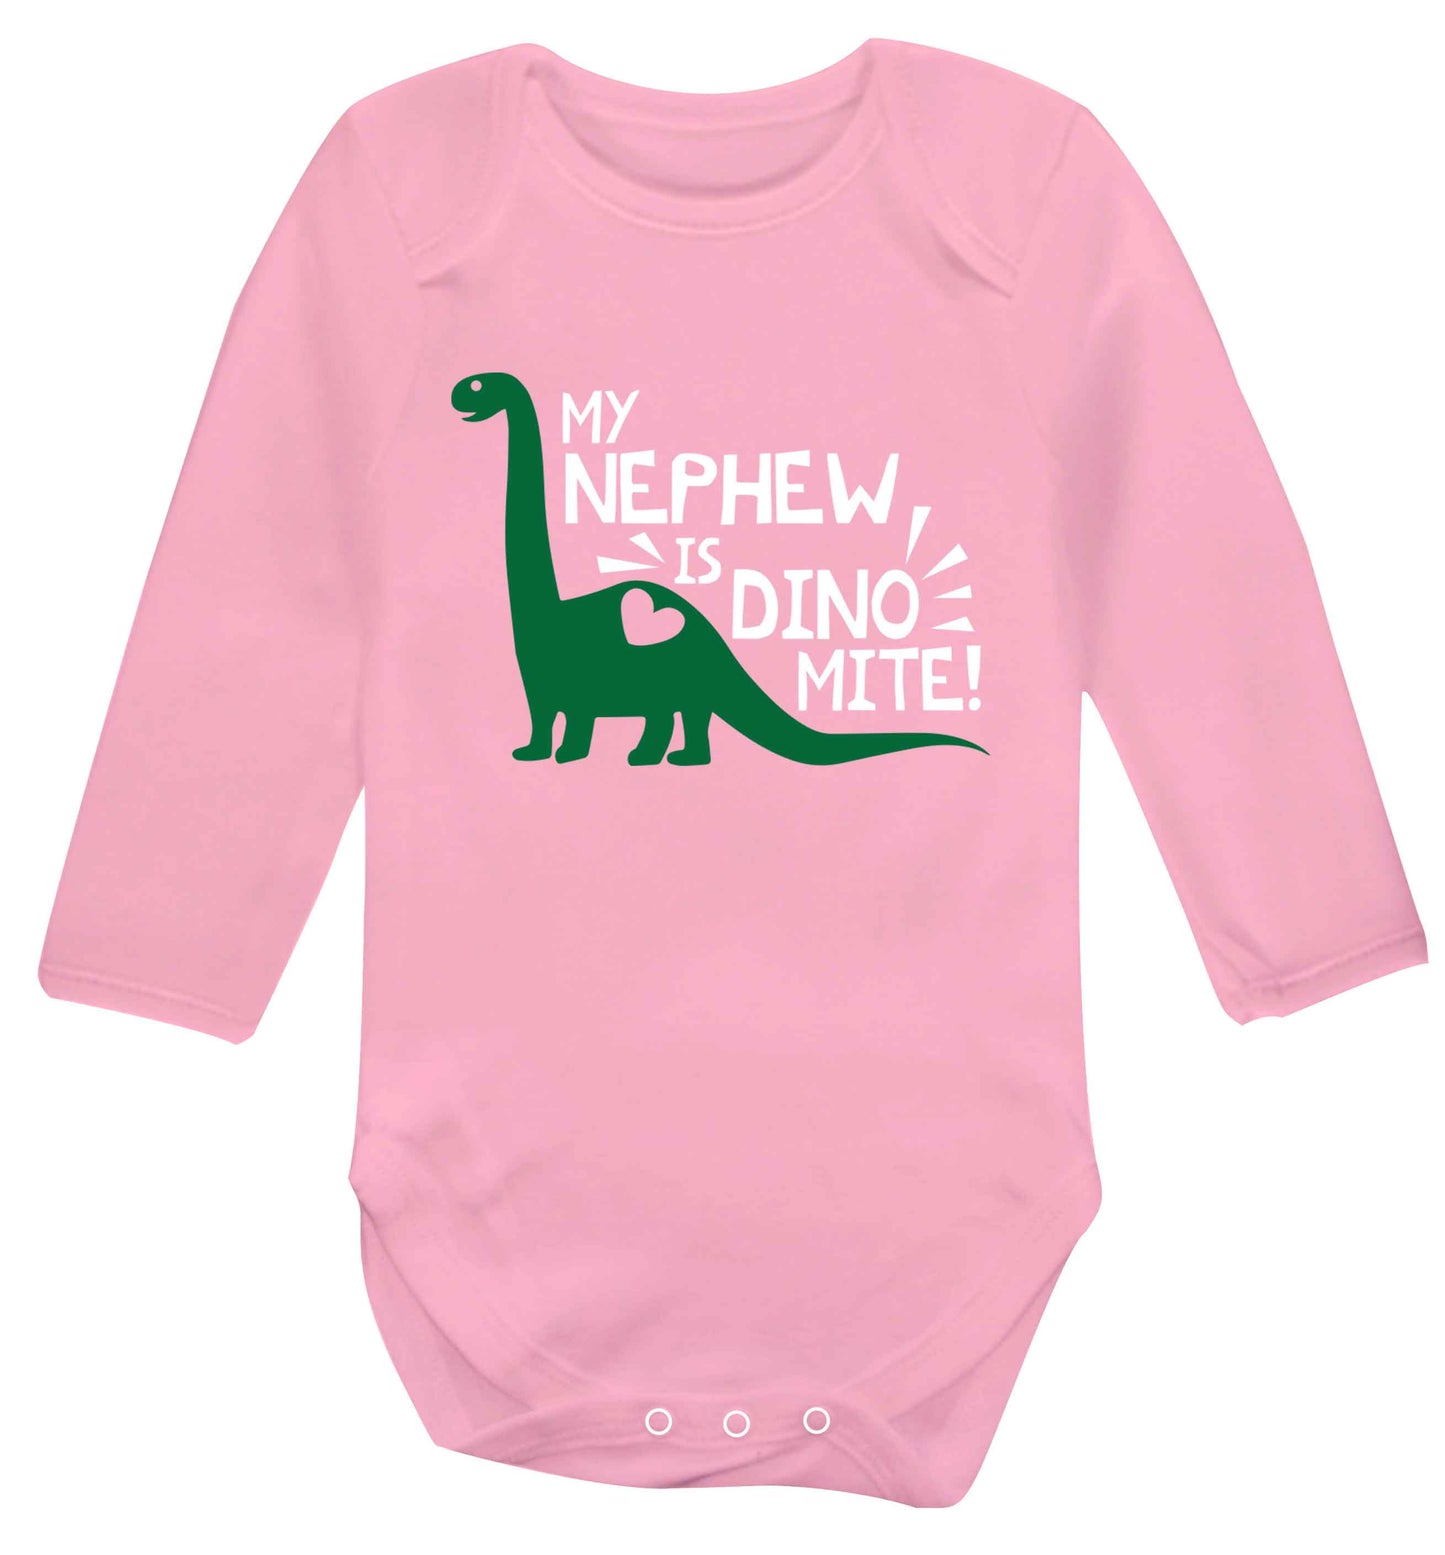 My nephew is dinomite! Baby Vest long sleeved pale pink 6-12 months